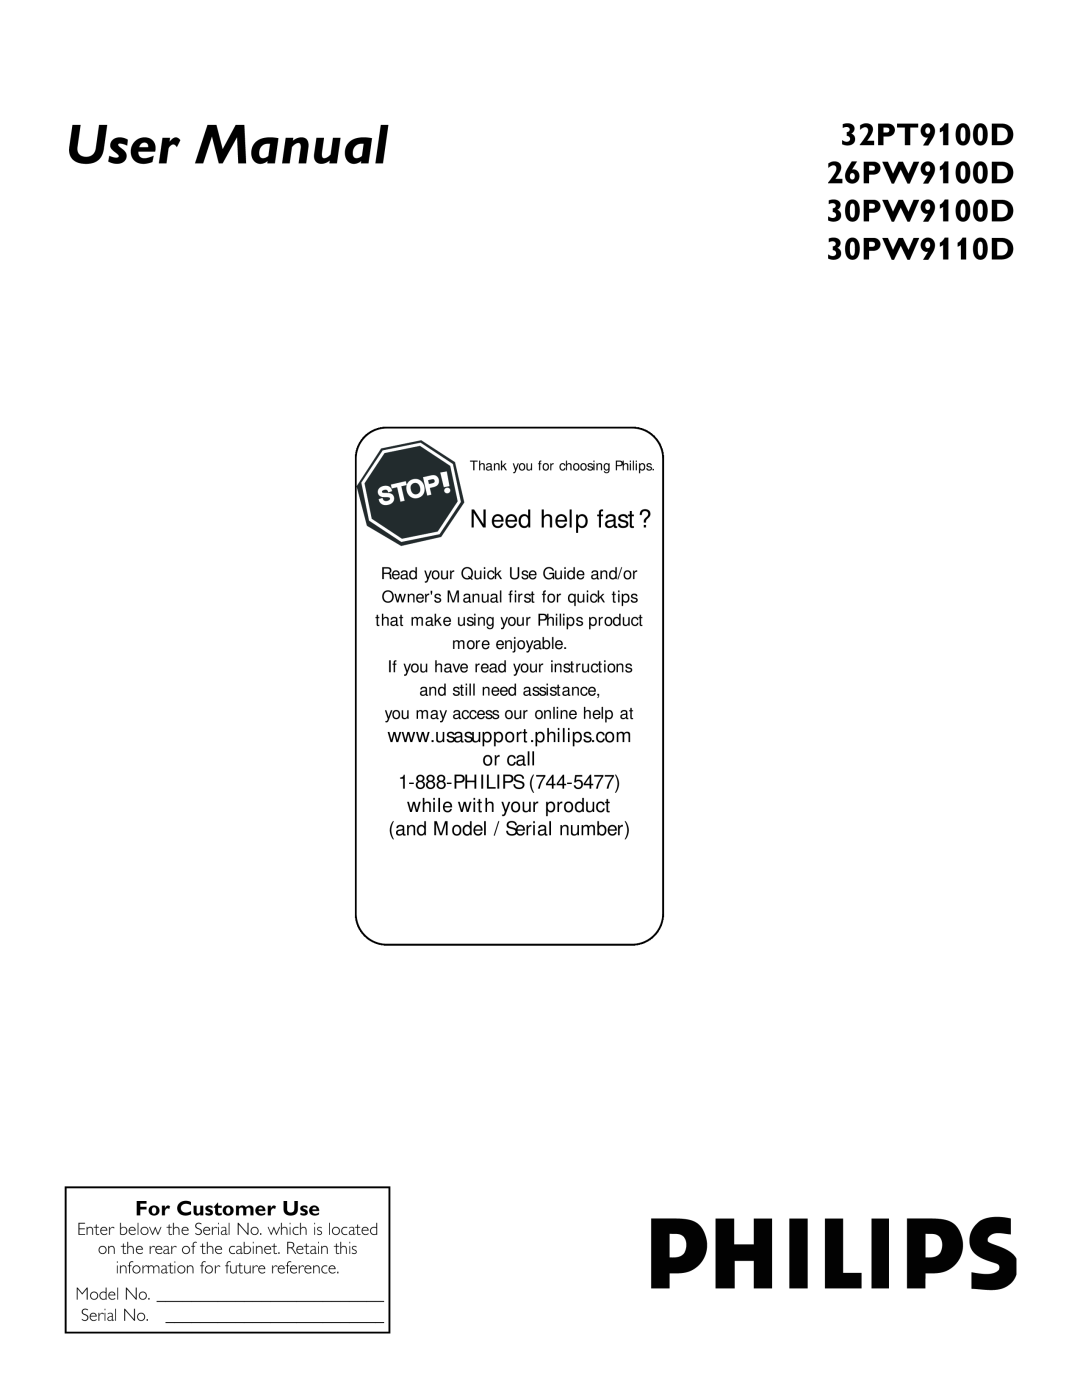 Philips user manual Need help fast?, For Customer Use, User Manual, 32PT9100D 26PW9100D 30PW9100D 30PW9110D 